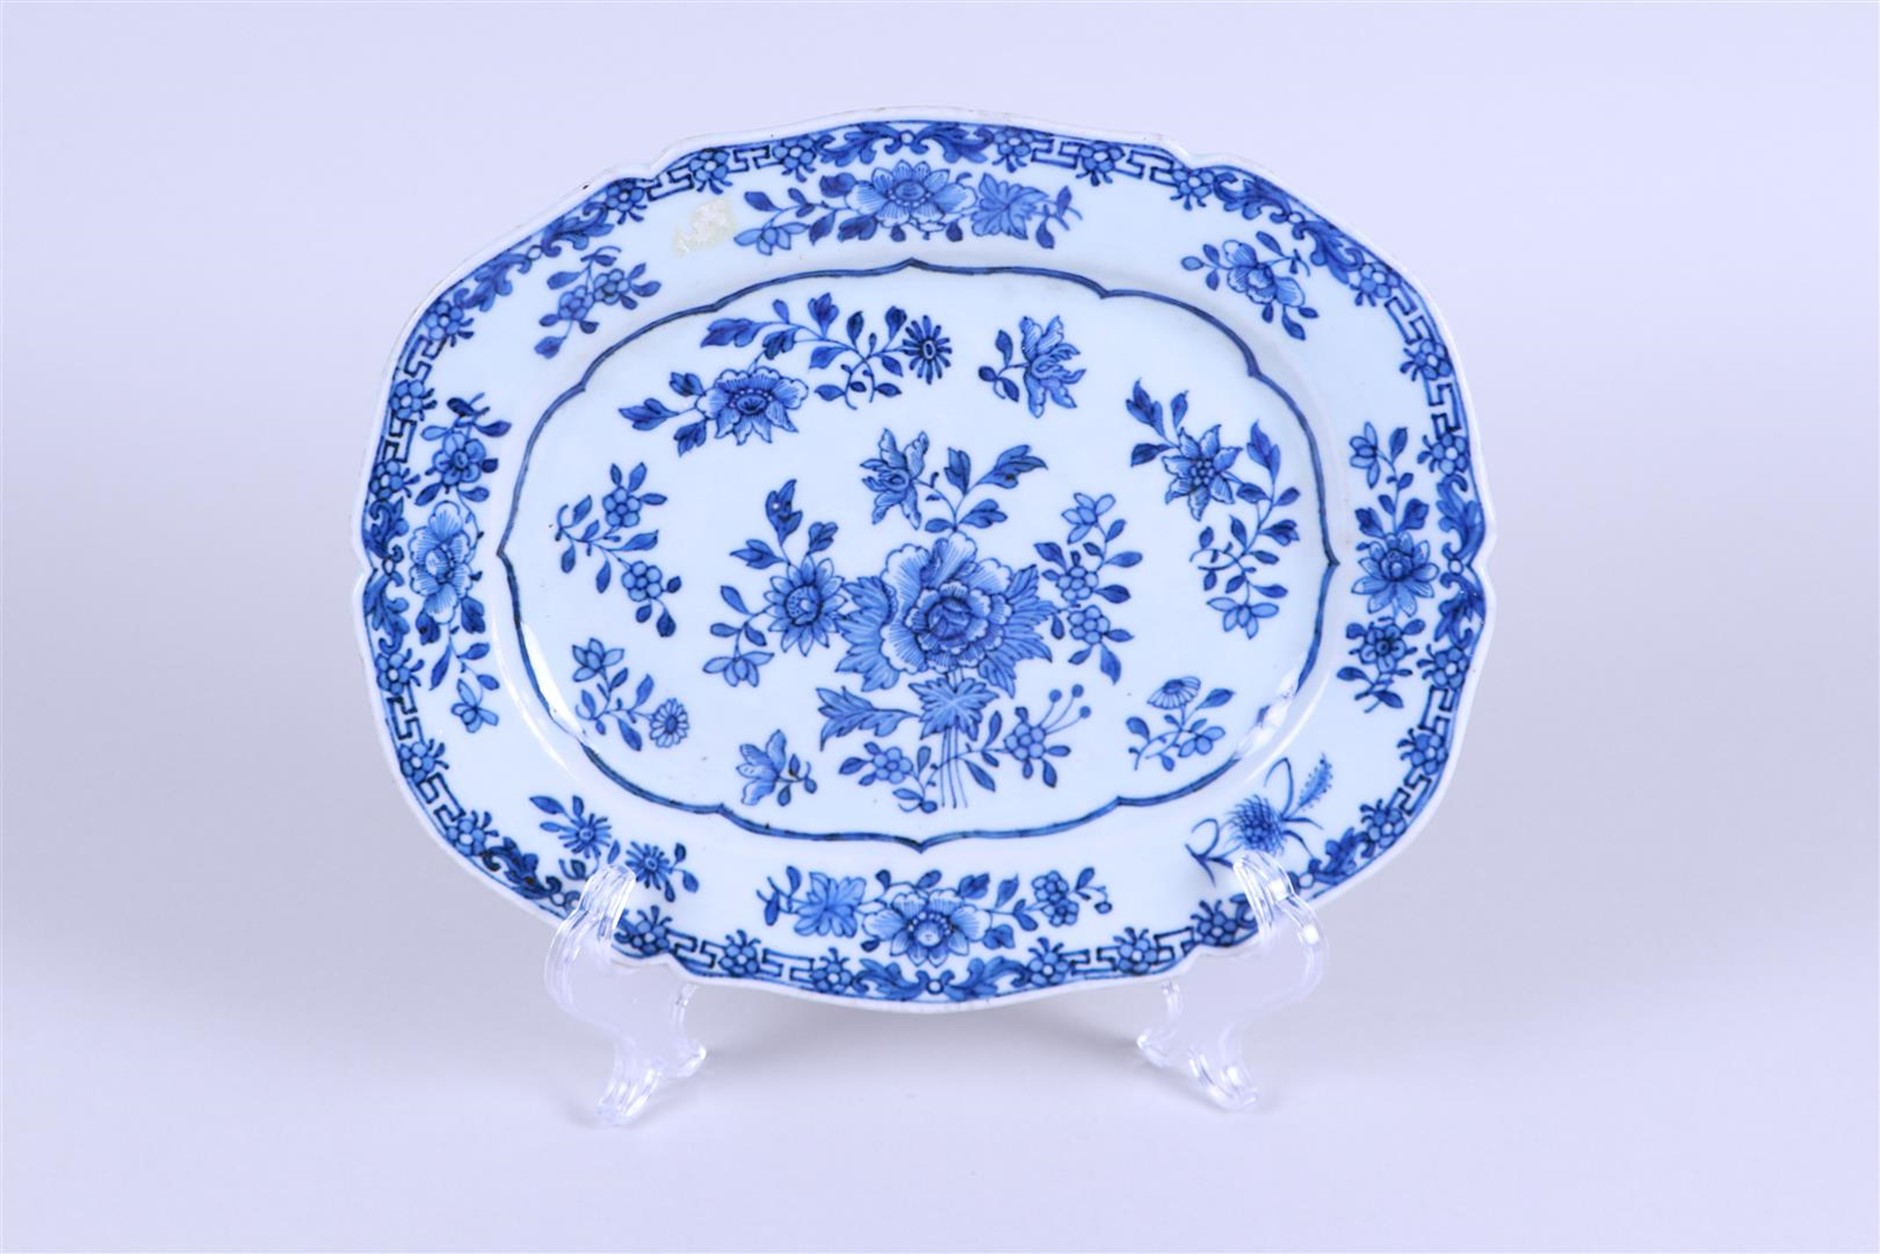 A porcelain dish with floral decor. China, Qianglong